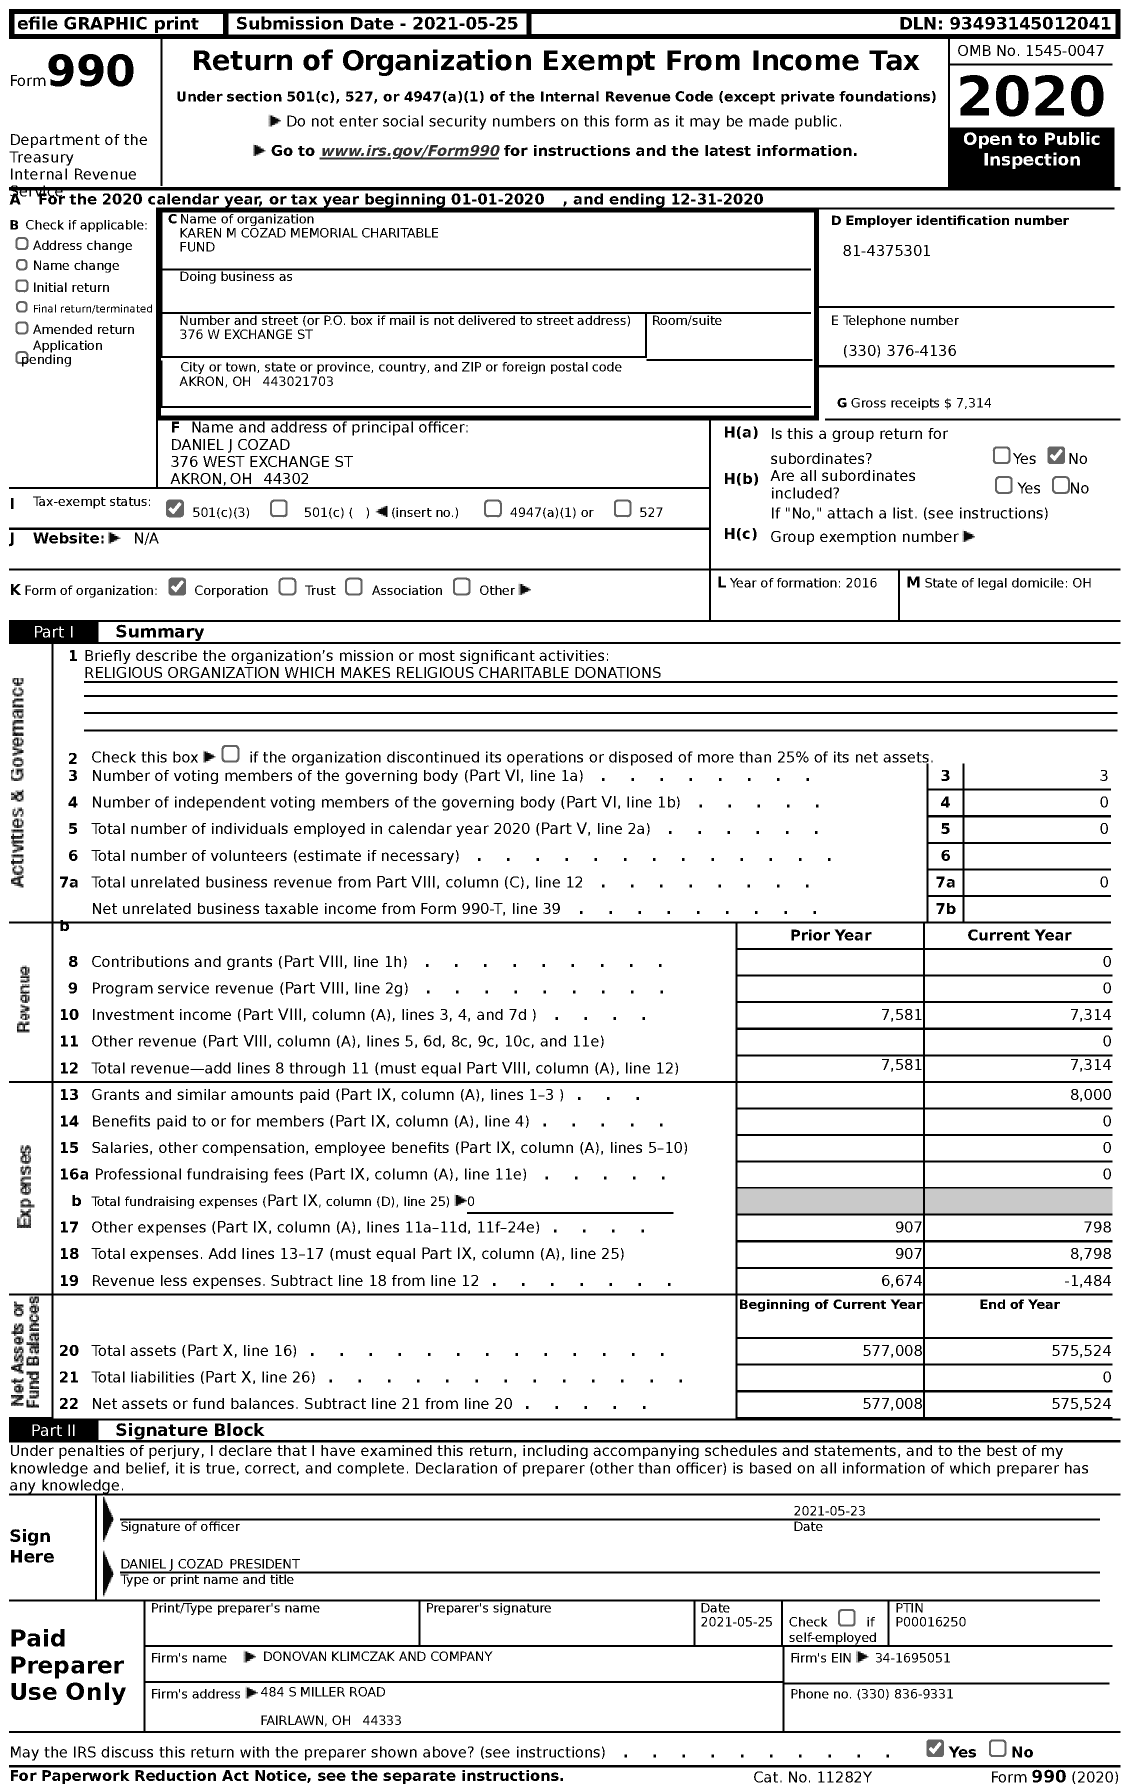 Image of first page of 2020 Form 990 for Karen M Cozad Memorial Charitable Fund